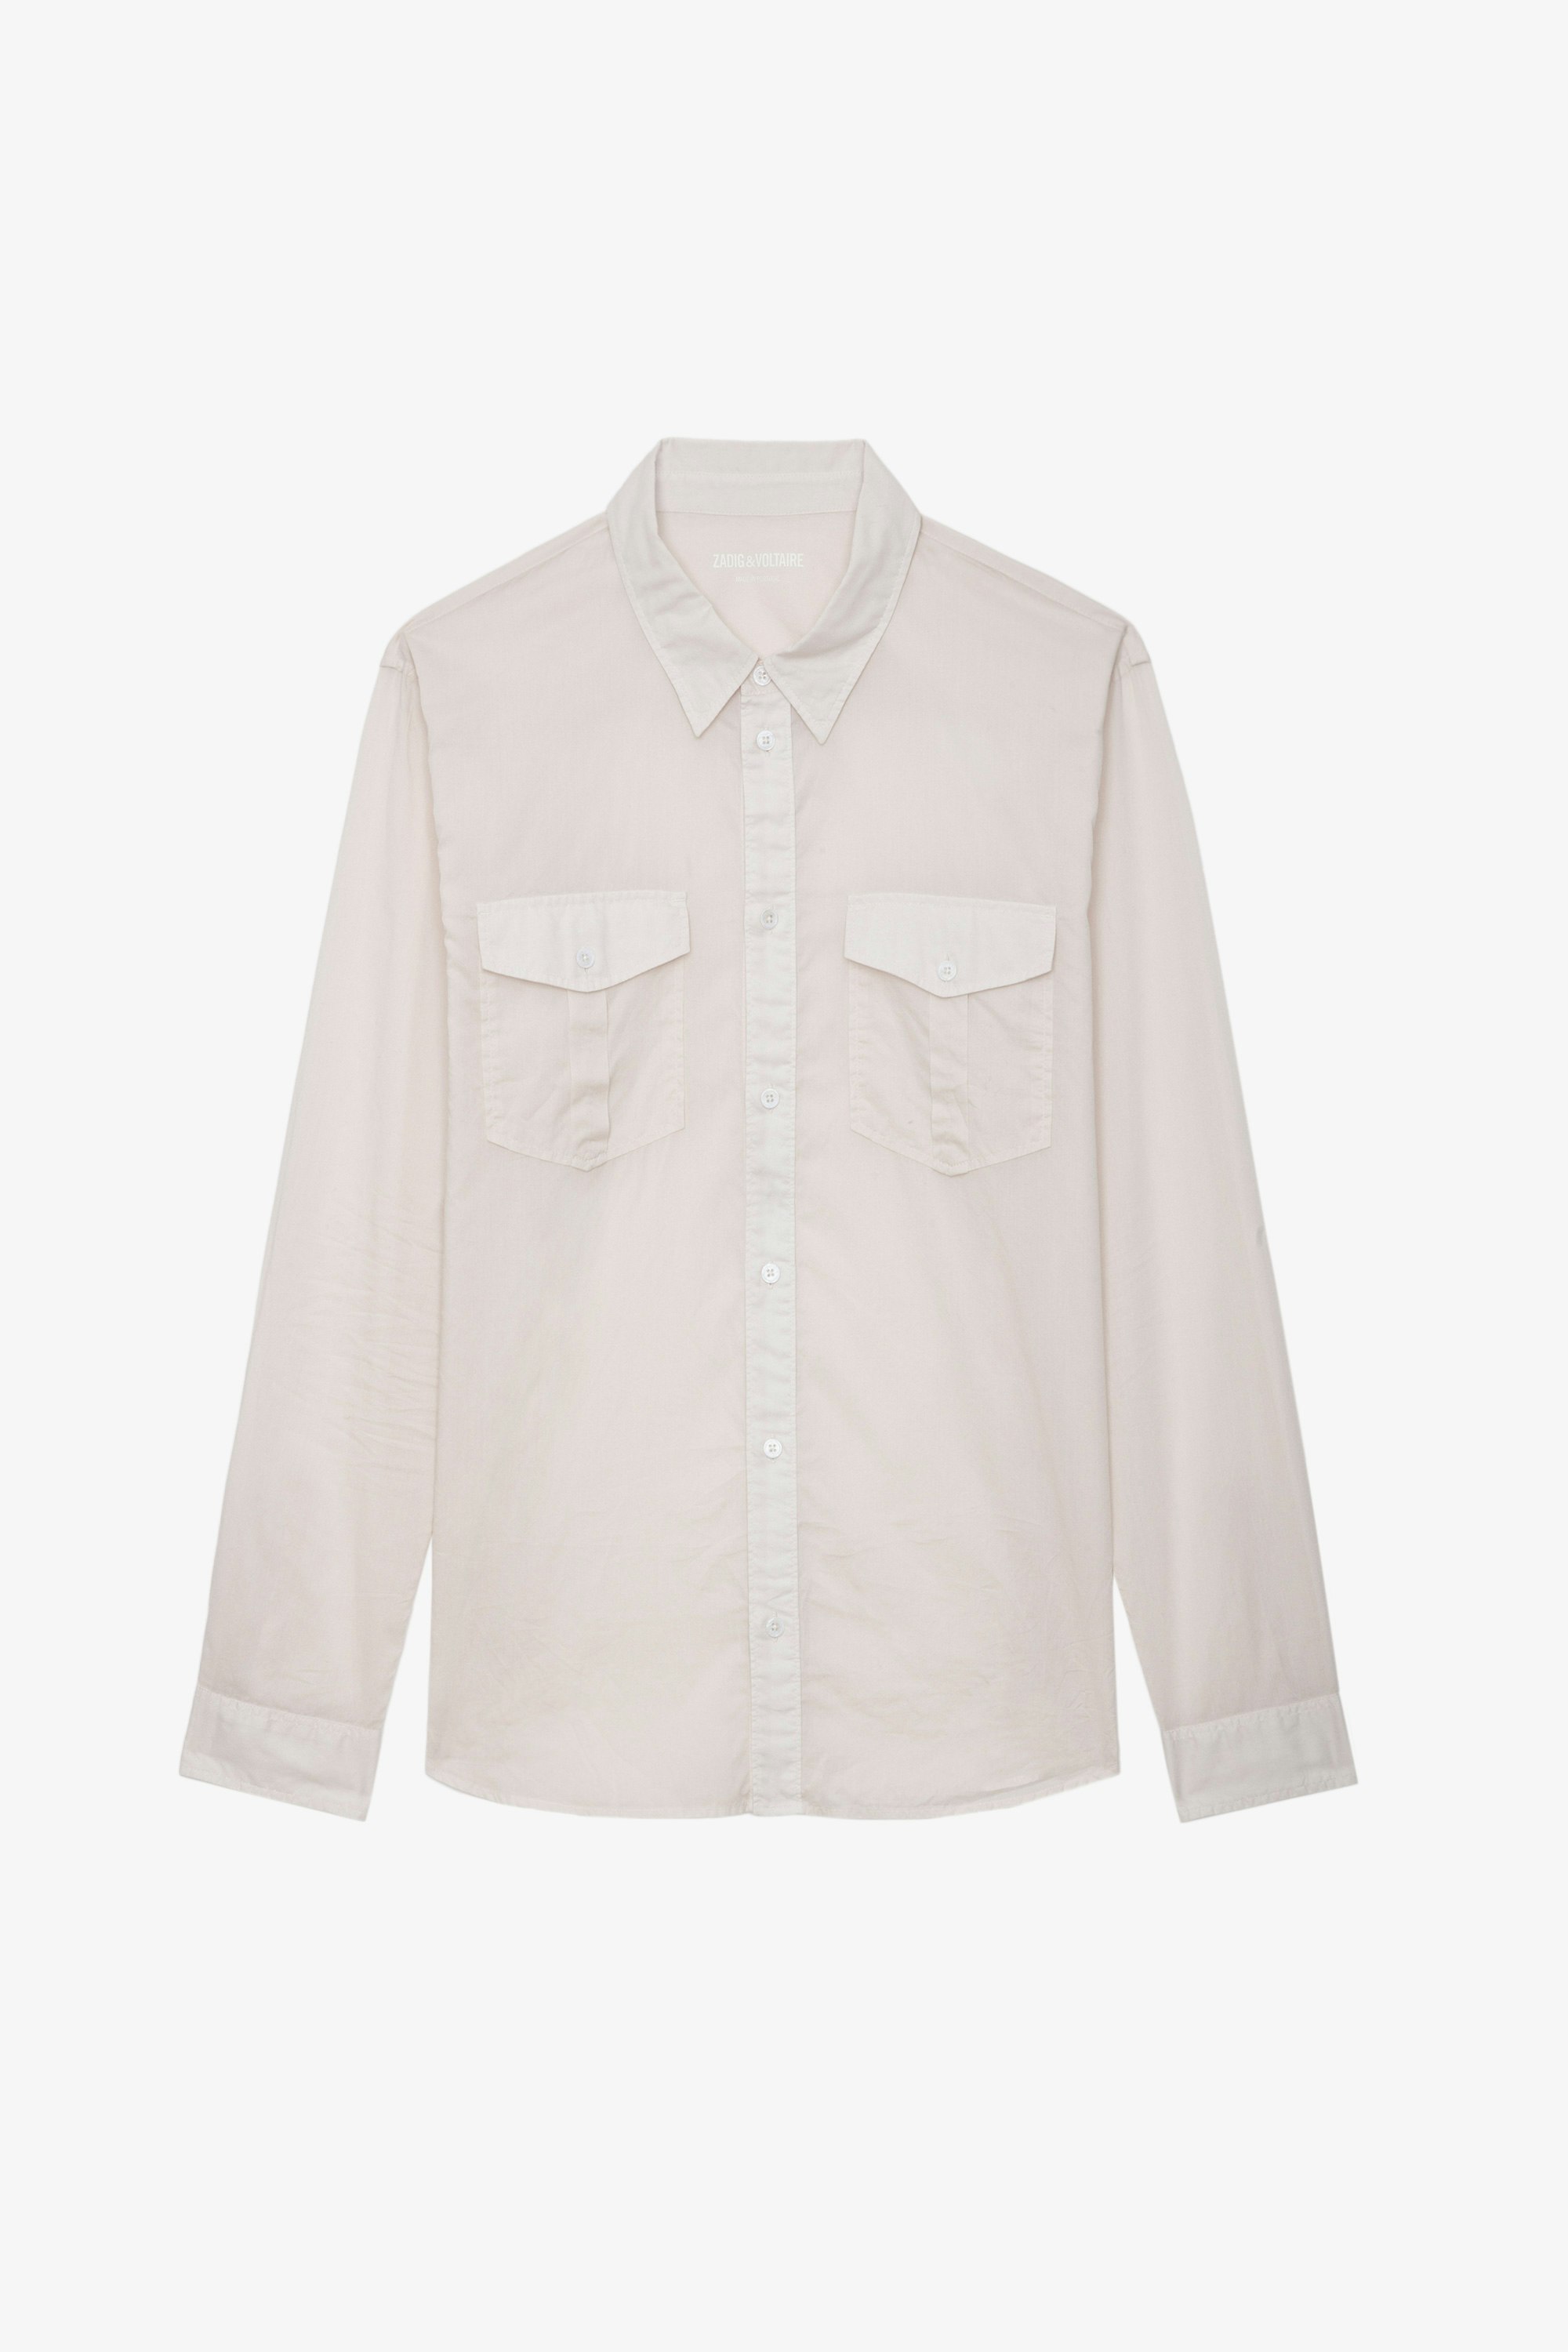 Thibault Shirt - Pale pink cotton voile long-sleeved shirt.